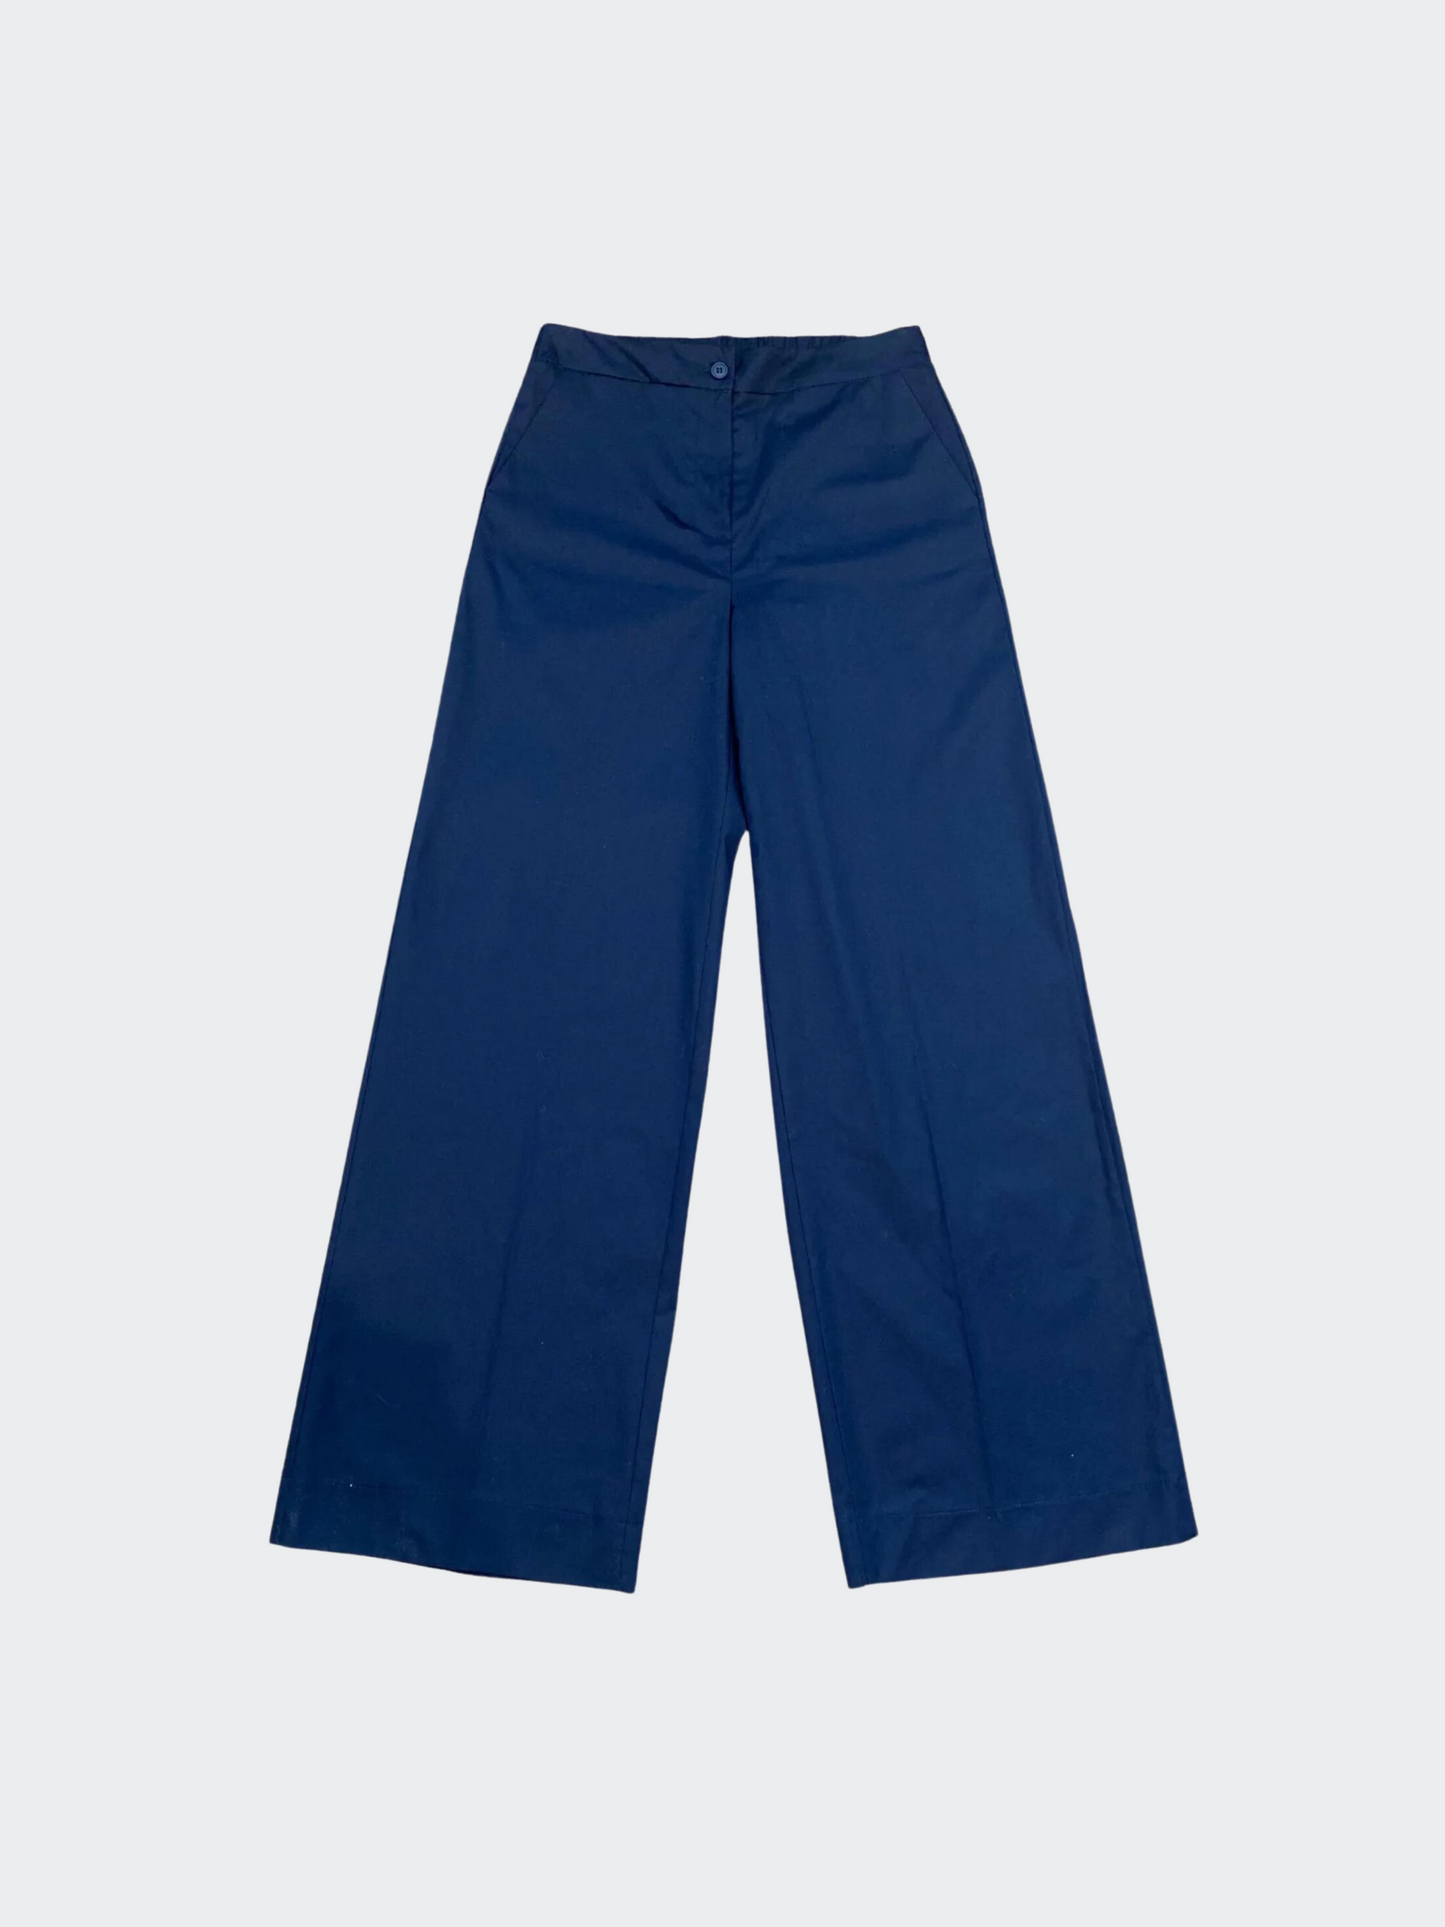 BUTTON FRONT WITH TWO POCKETS WIDE LEG PANT